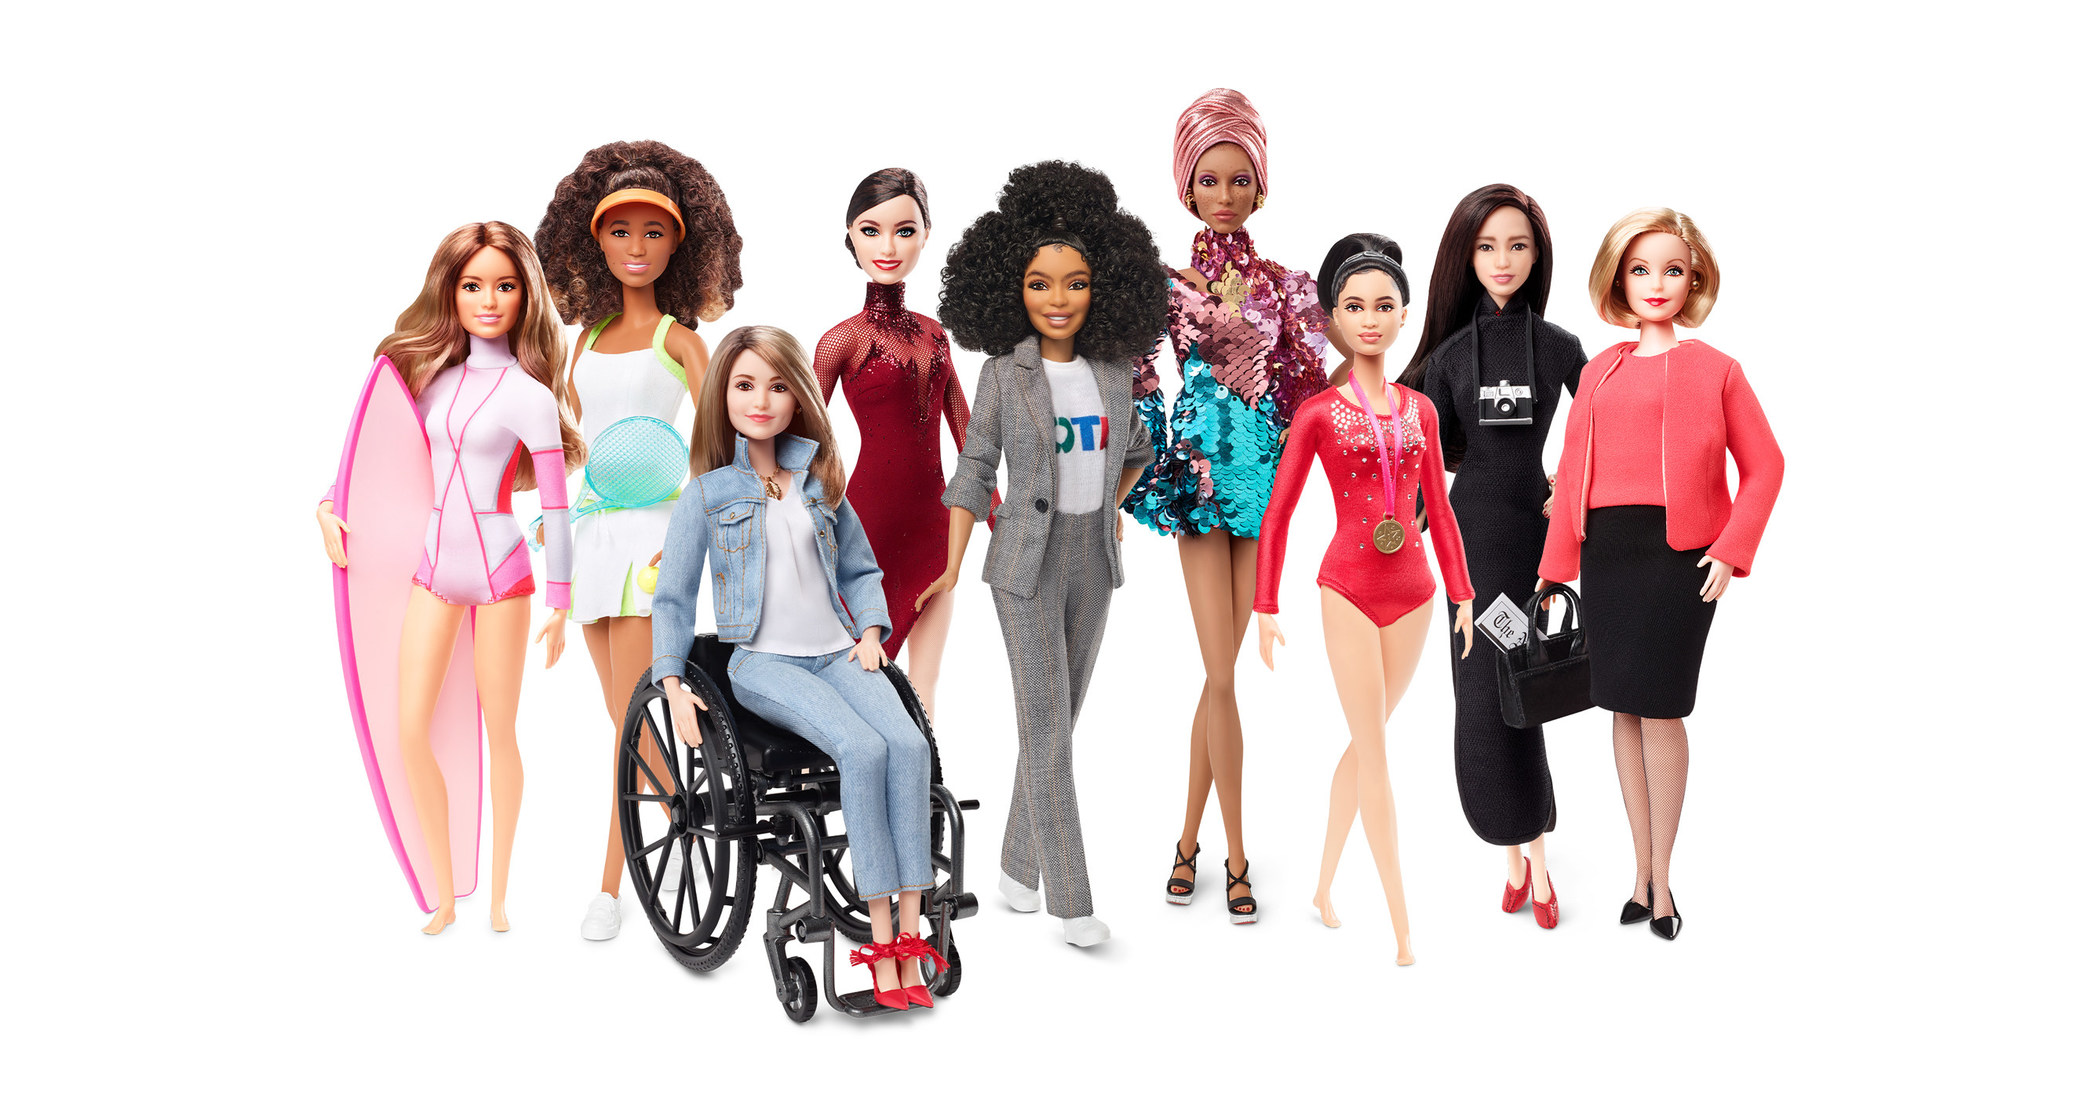 Barbie's 60th Birthday Wish Was to Be More Inclusive. Now What?